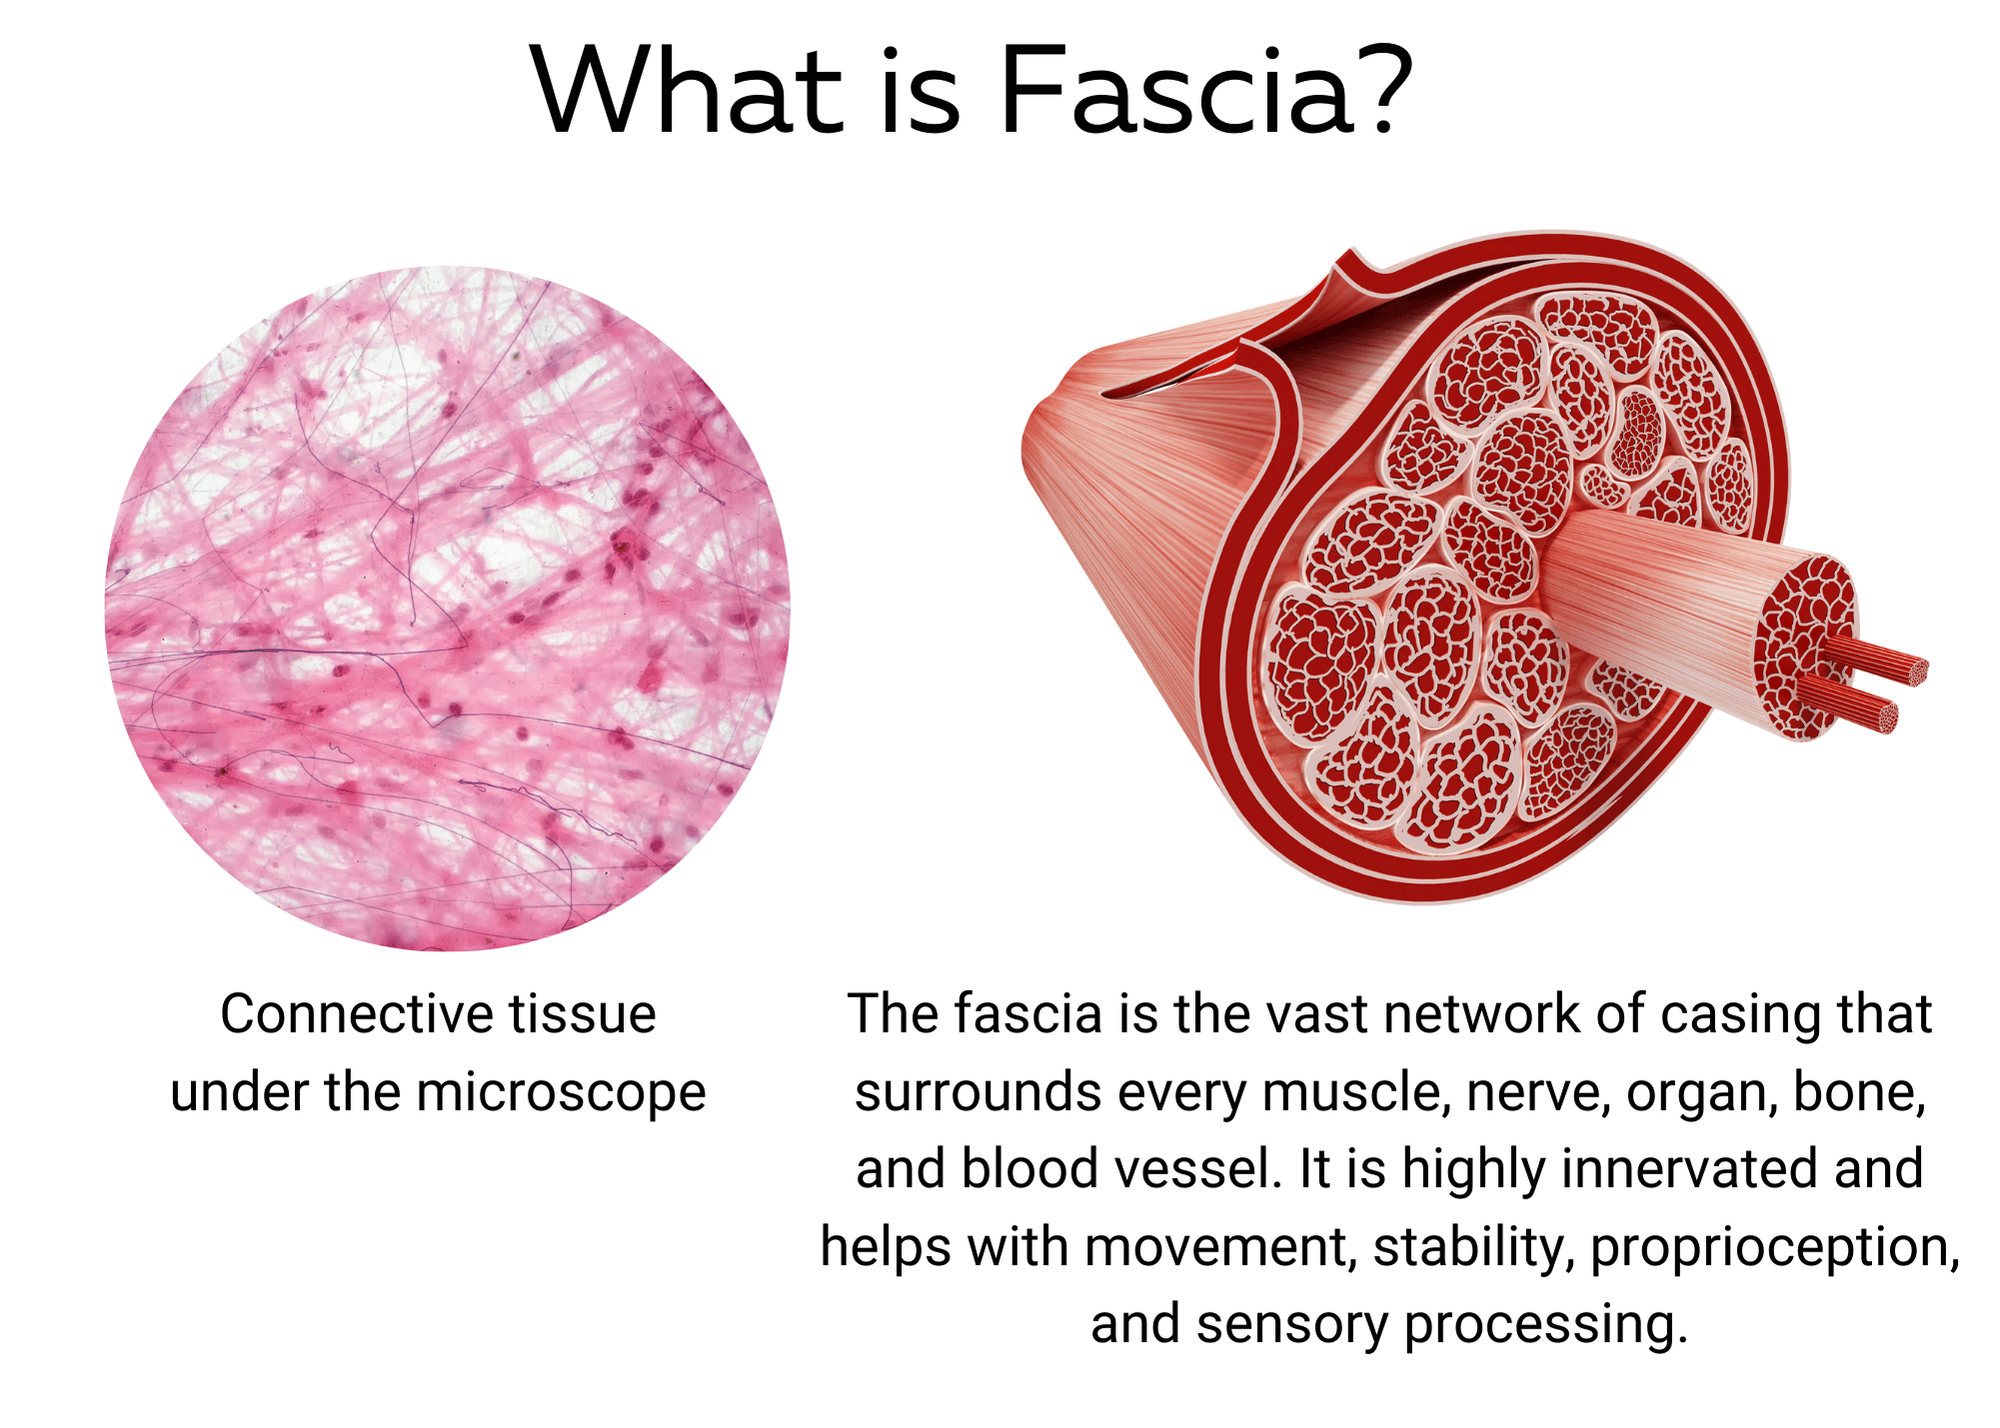 Expainer image of Fascia. Shows the fibers under a microscope as well as a cross section of the muscle 